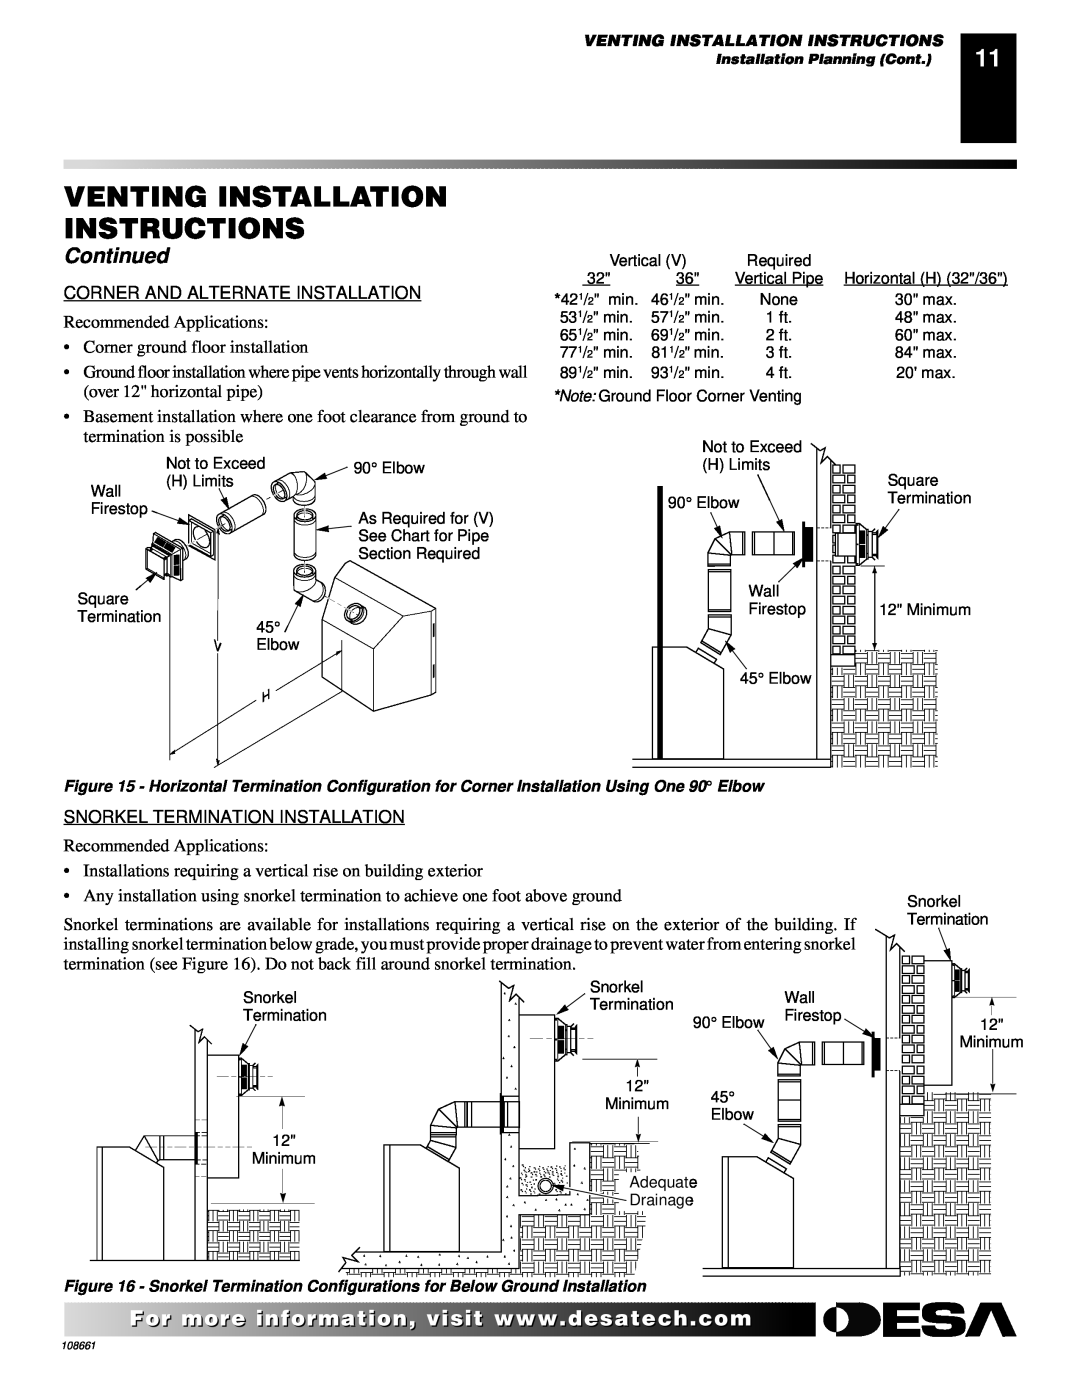 Desa T32N, T36N, T32P, T36P installation manual Venting Installation Instructions, Continued, Recommended Applications 